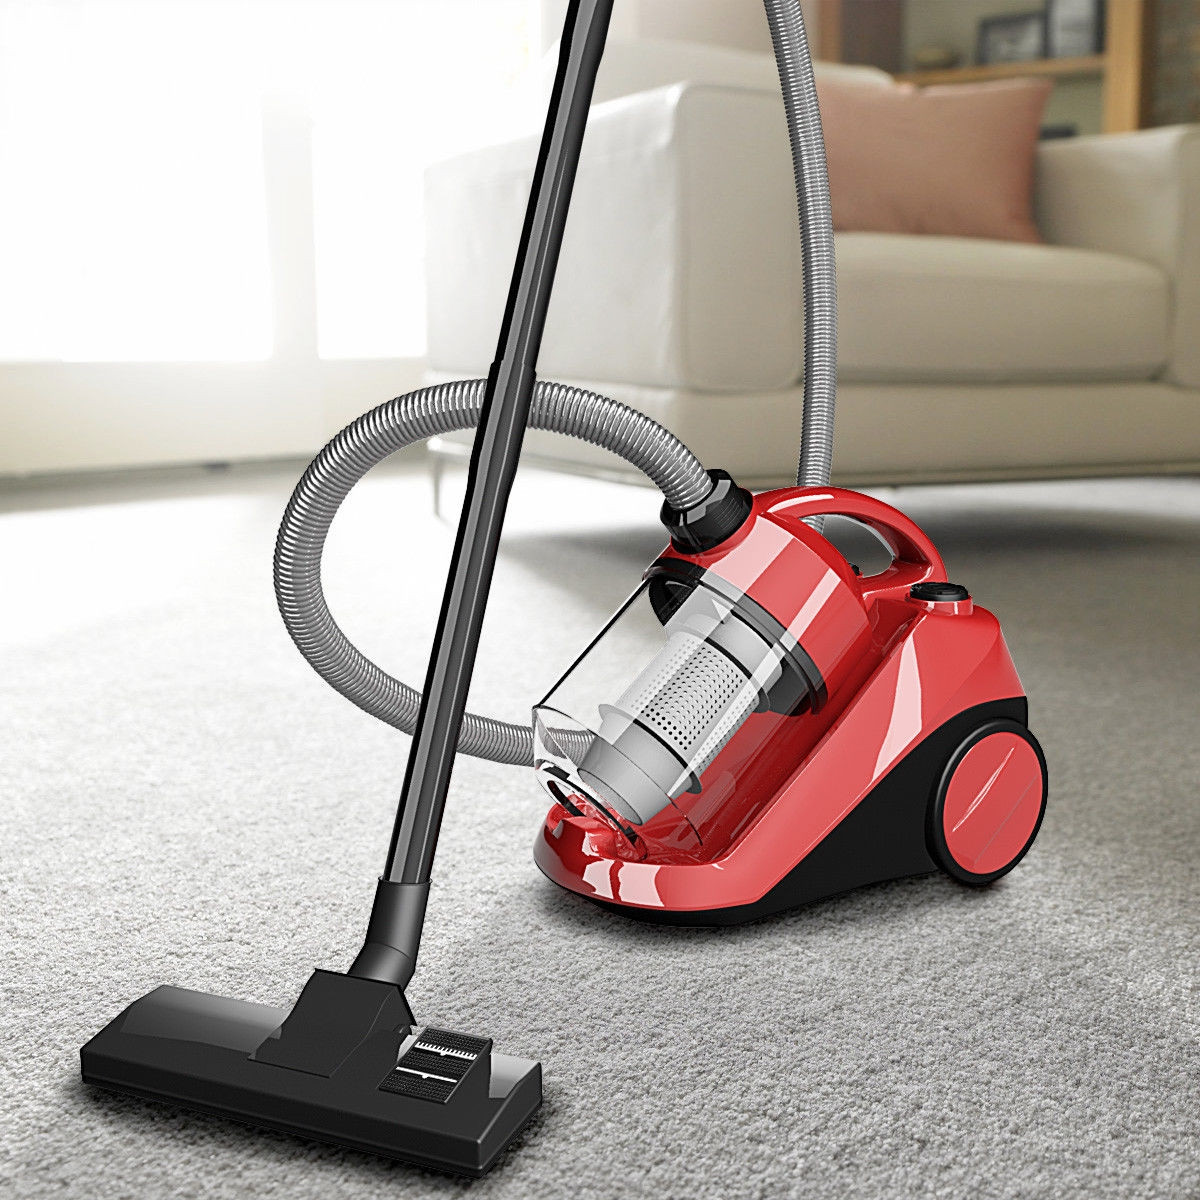 Bagless Cord Rewind Canister Vacuum Cleaner W / Washable Filter